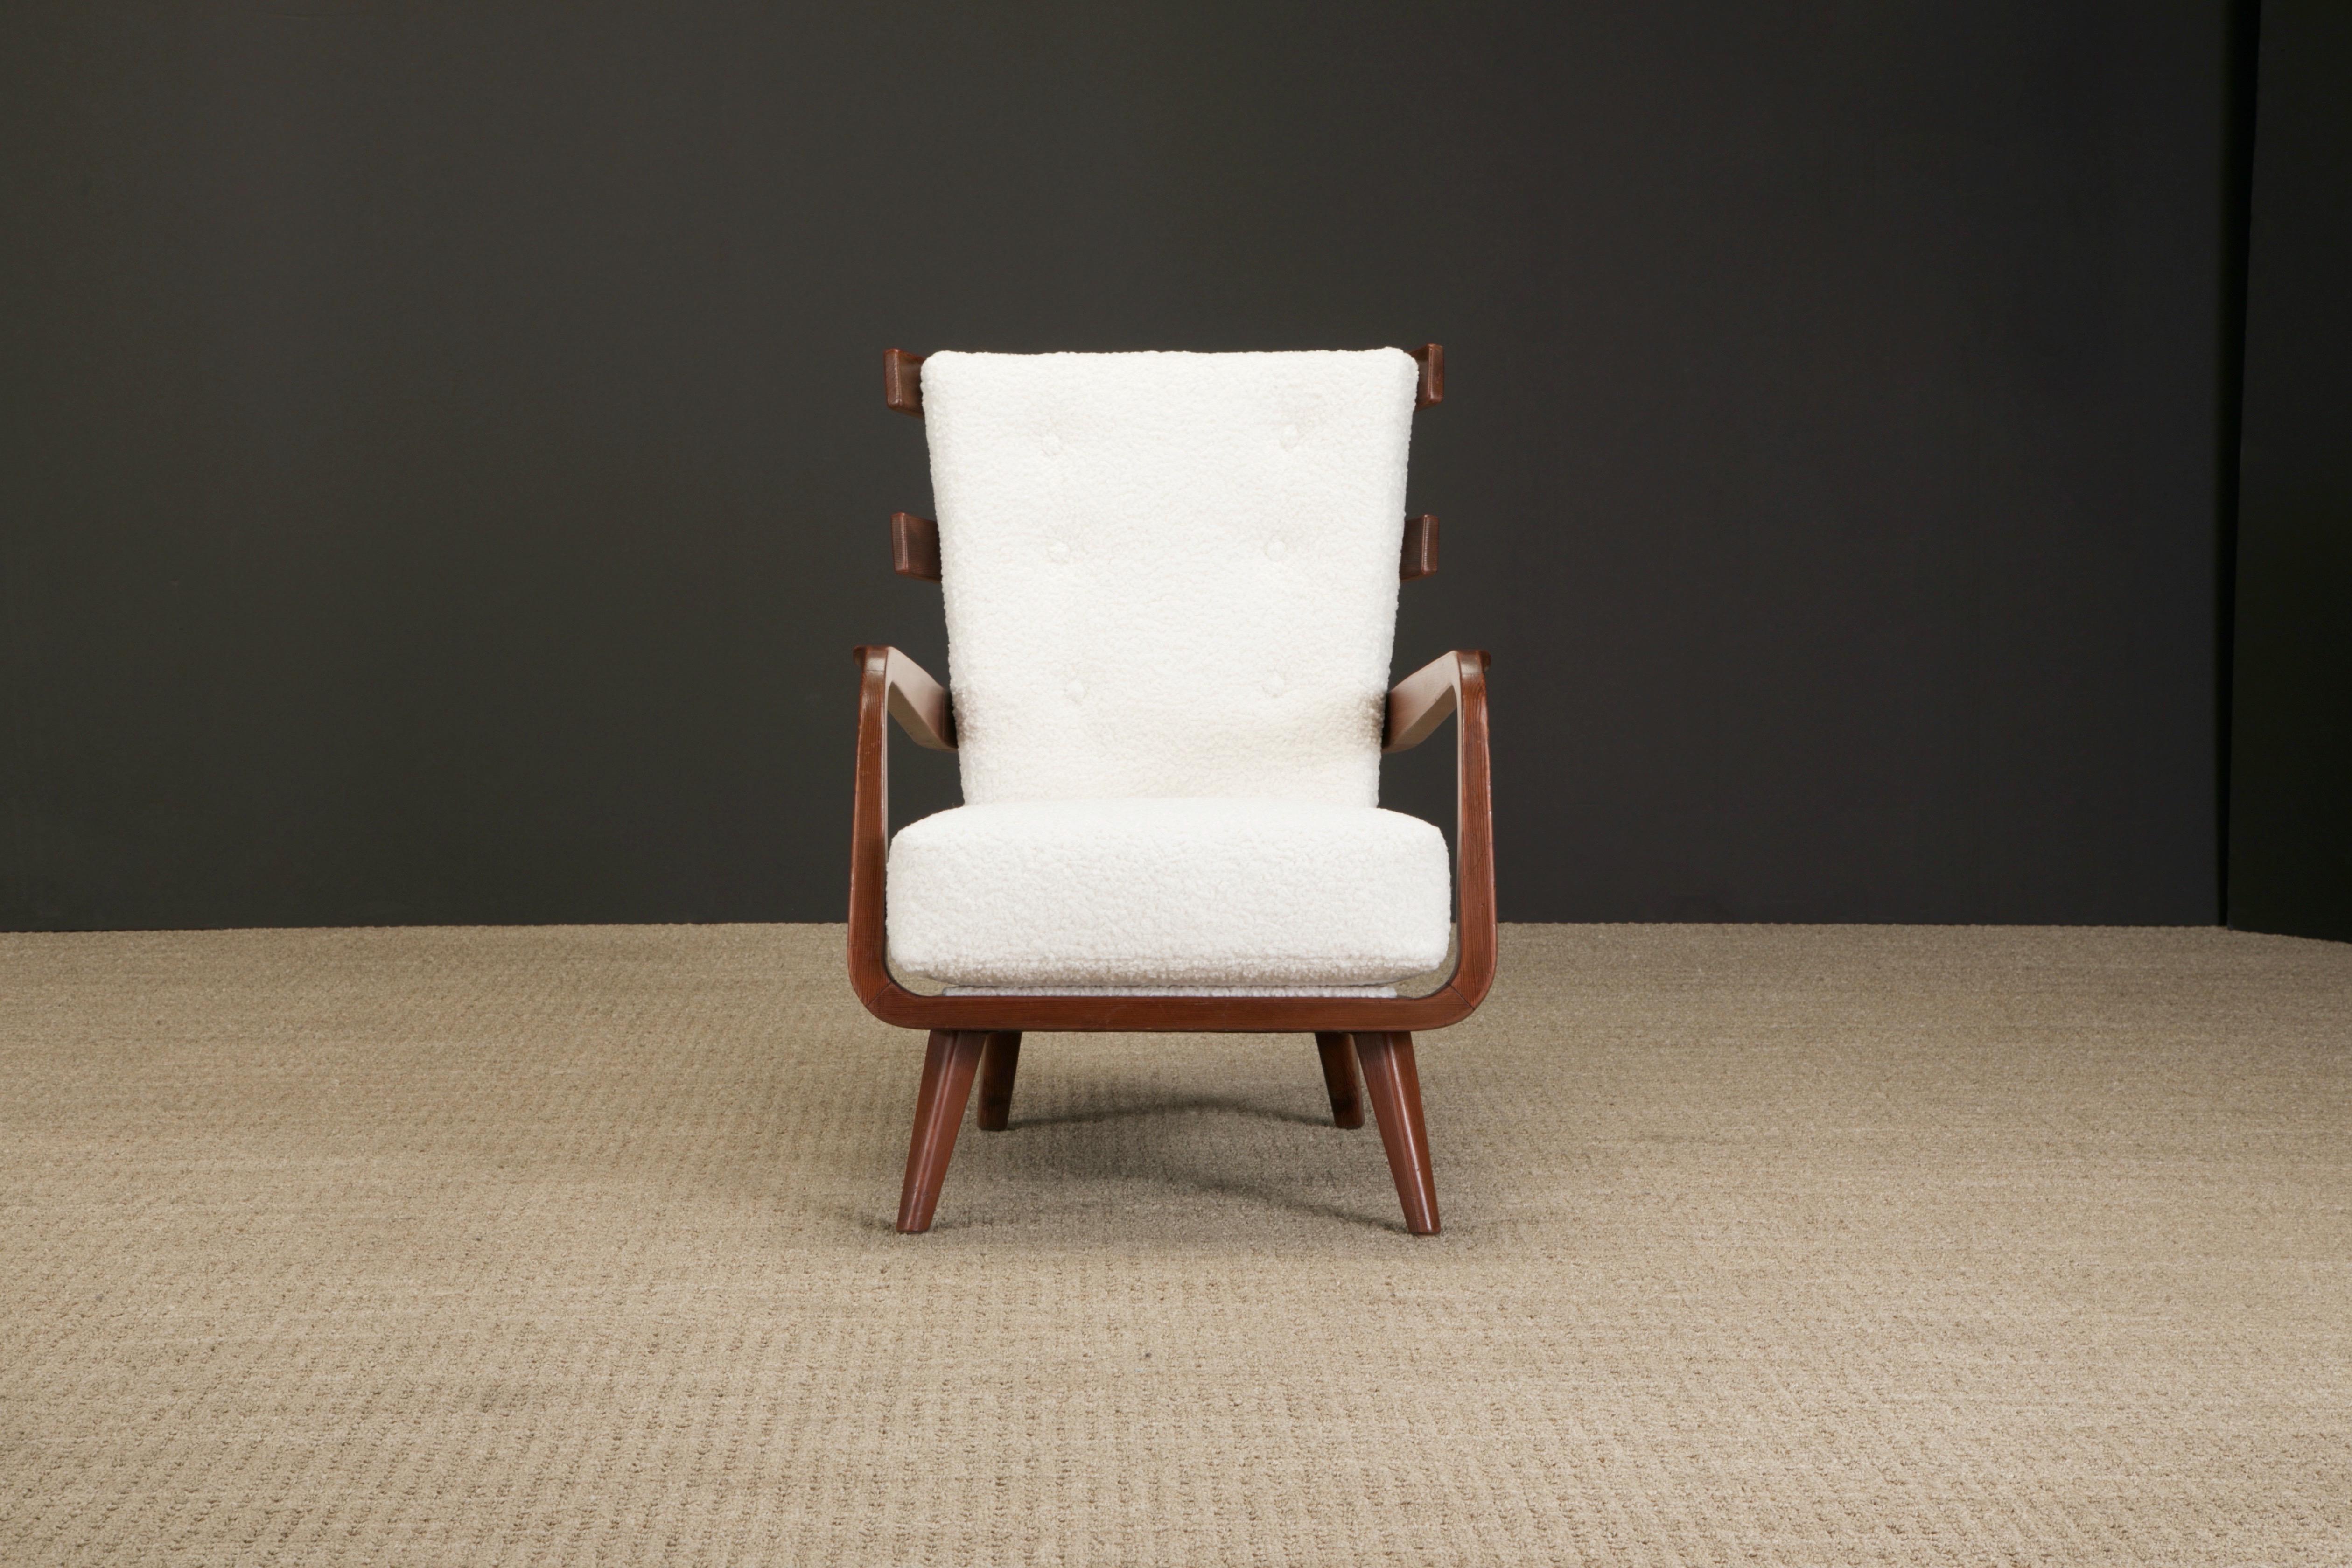 This gorgeous sculptural armchair by Giuseppe Scapinelli was crafted in Brazil circa 1960 and freshly reupholstered with luxurious bouclé fabric. Quintessential Brazilian Modernism with the refined elegance that Italian-born Scapinelli was known